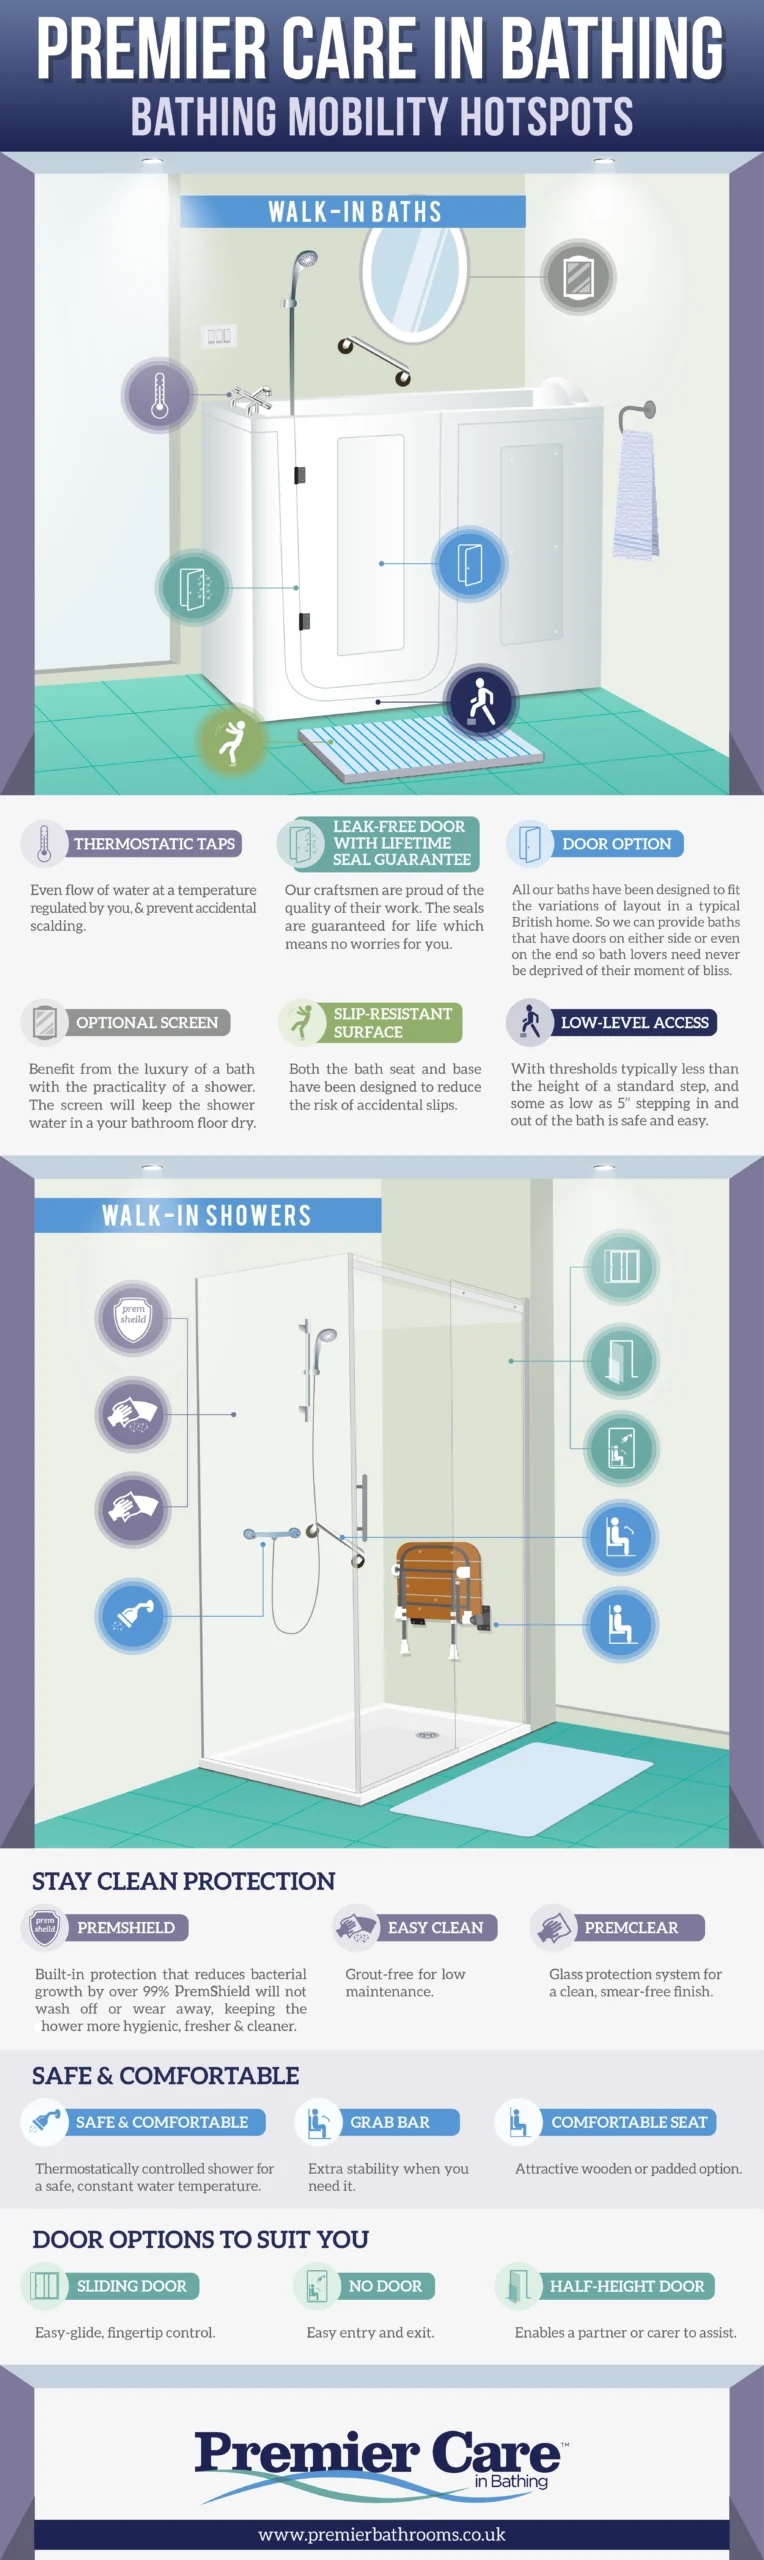 A History Of Bathing Mobility Hotspots [InfoGraphic]